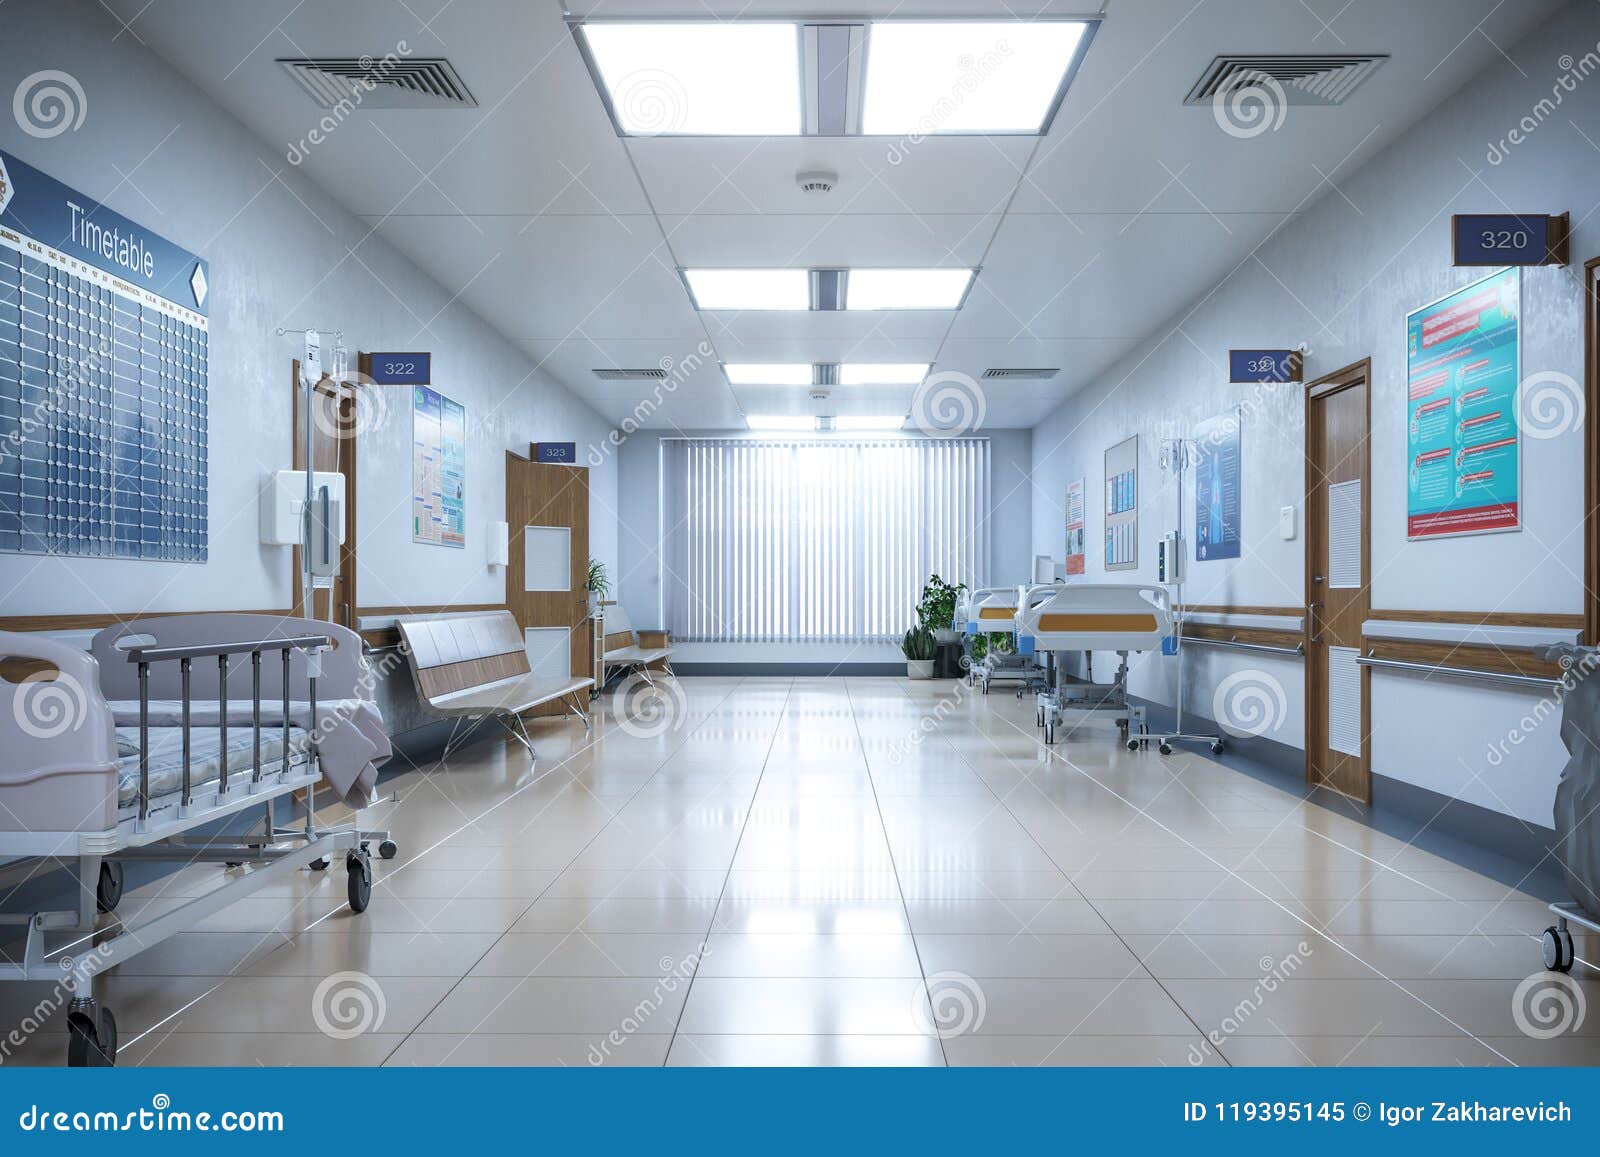 hallway the emergency room and outpatient hospital